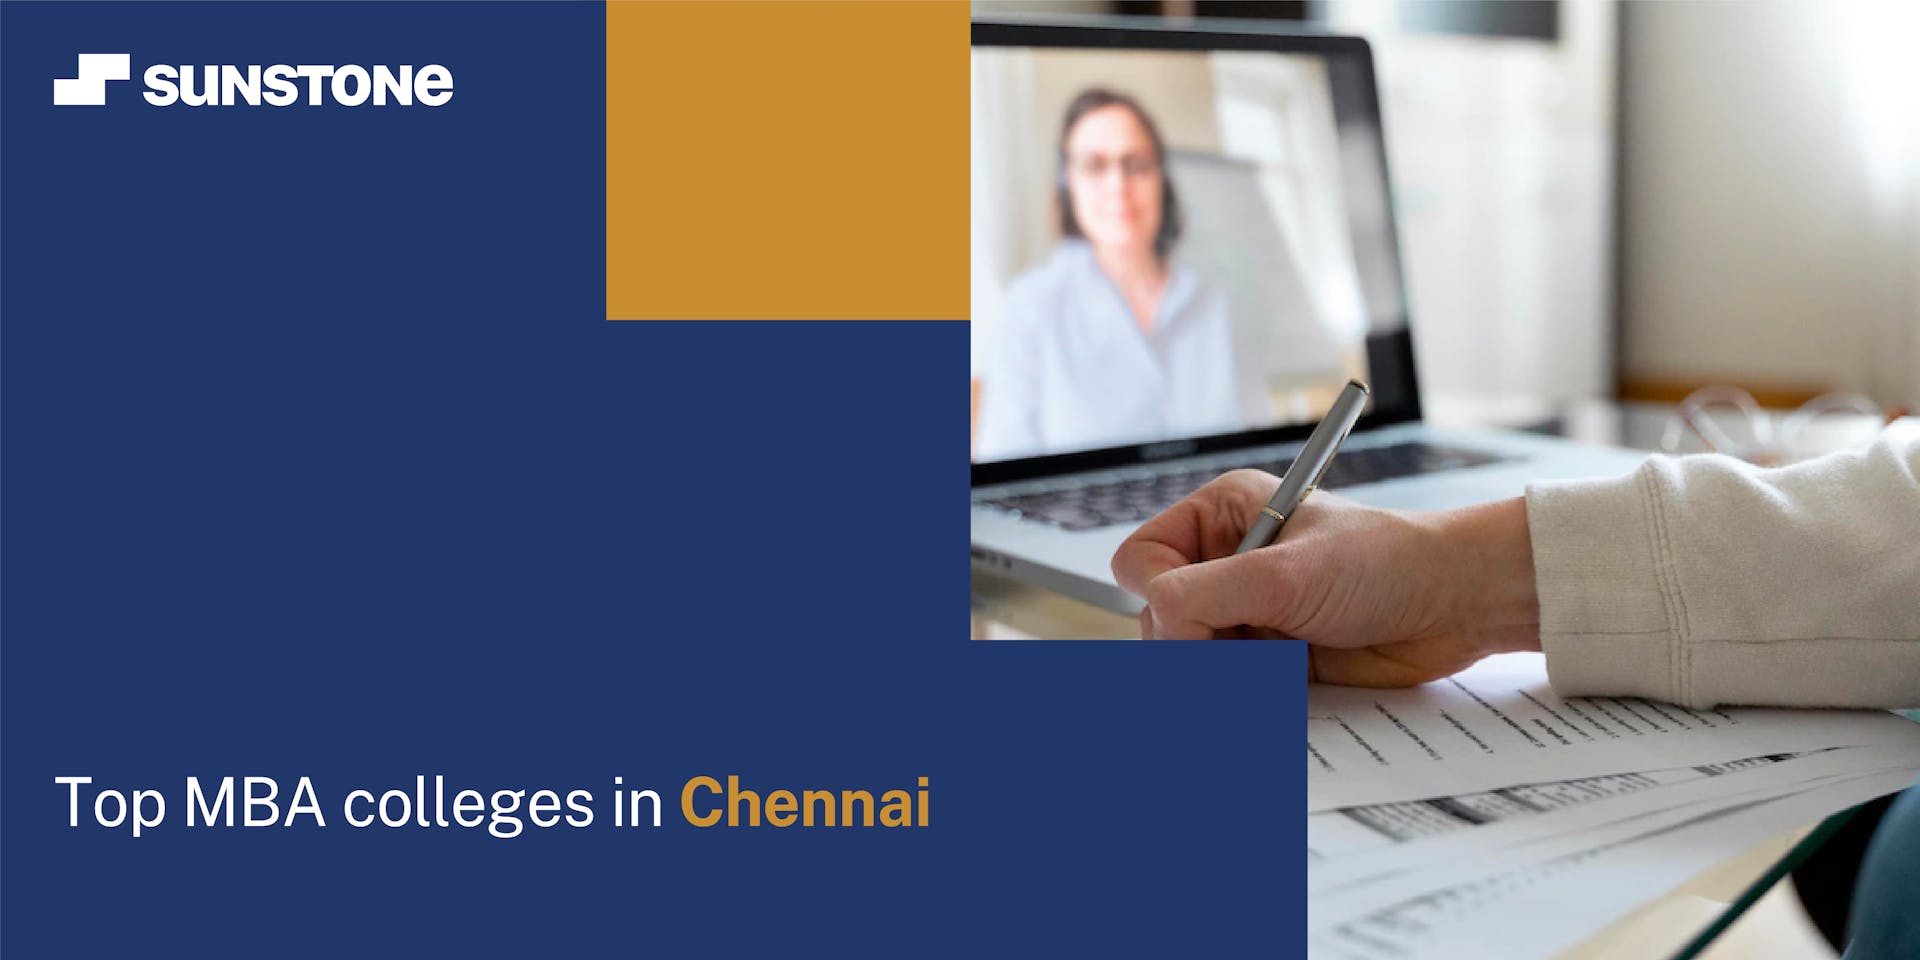 Top MBA colleges in Chennai | Sunstone